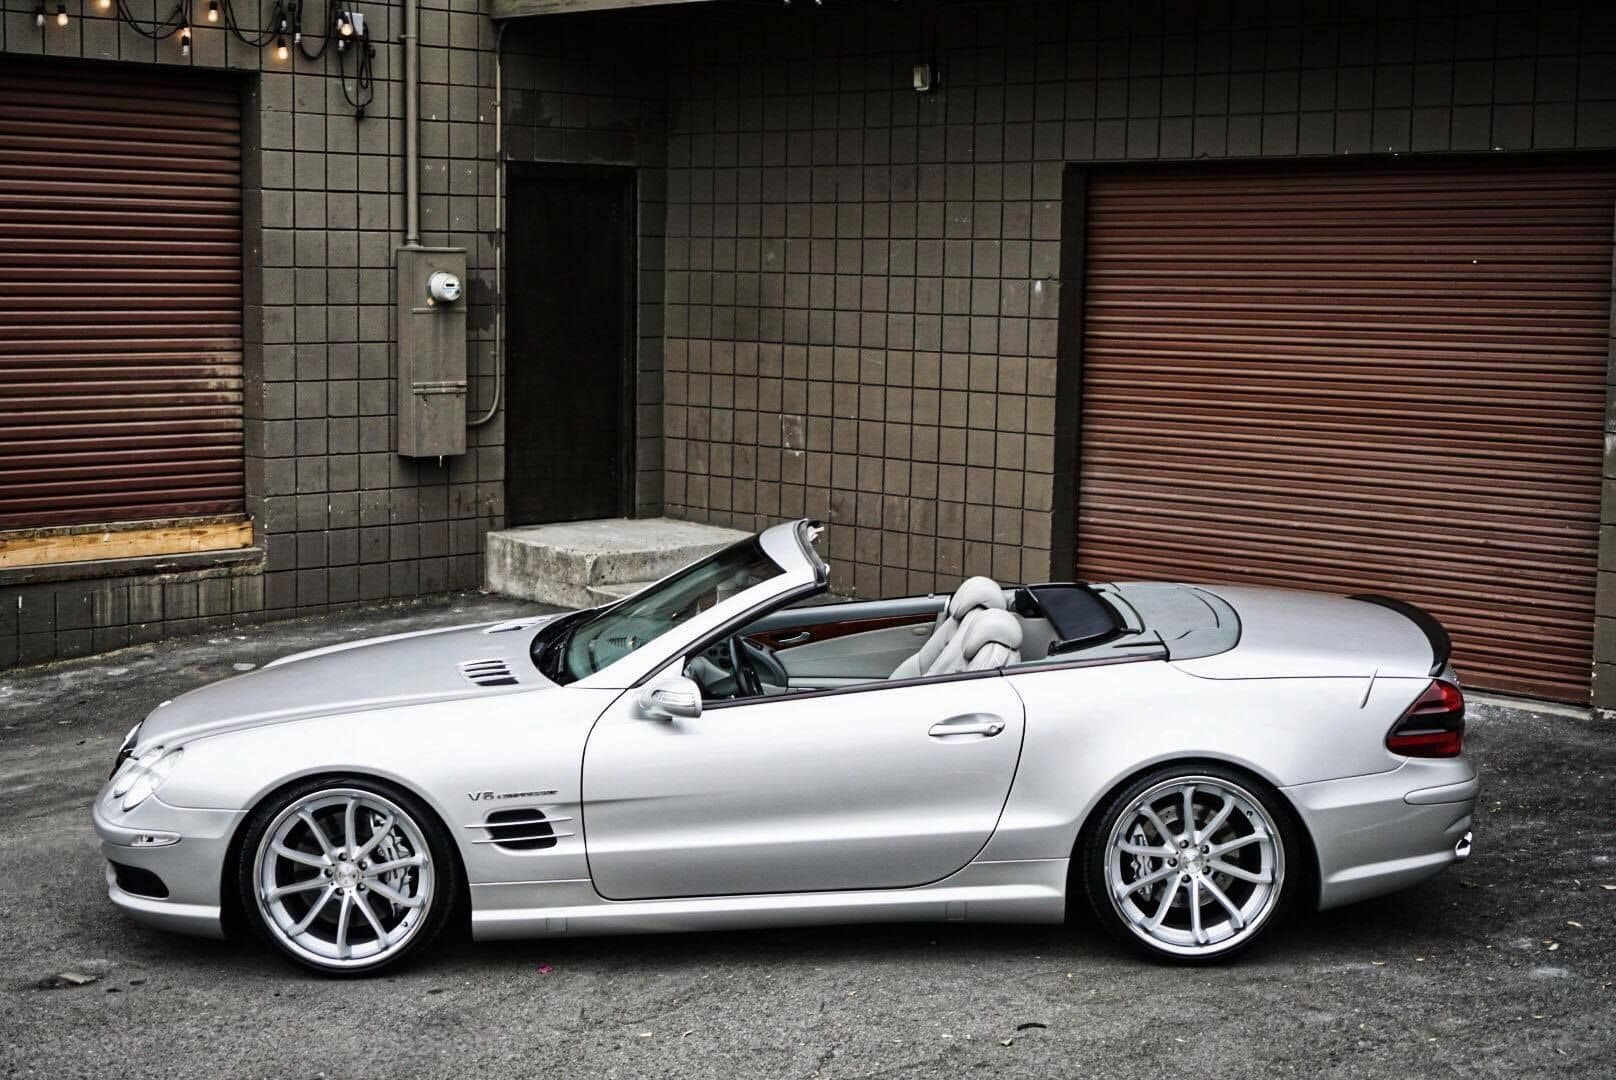 2004 Mercedes-Benz SL55 AMG - 2004 Mercedes SL55 AMG // Low Miles / Upgrades / Extremely Clean / Fully Maintained - Used - VIN WDBSK74F04F077155 - 84,500 Miles - 8 cyl - 2WD - Automatic - Convertible - Silver - Lemon Grove, CA 91945, United States